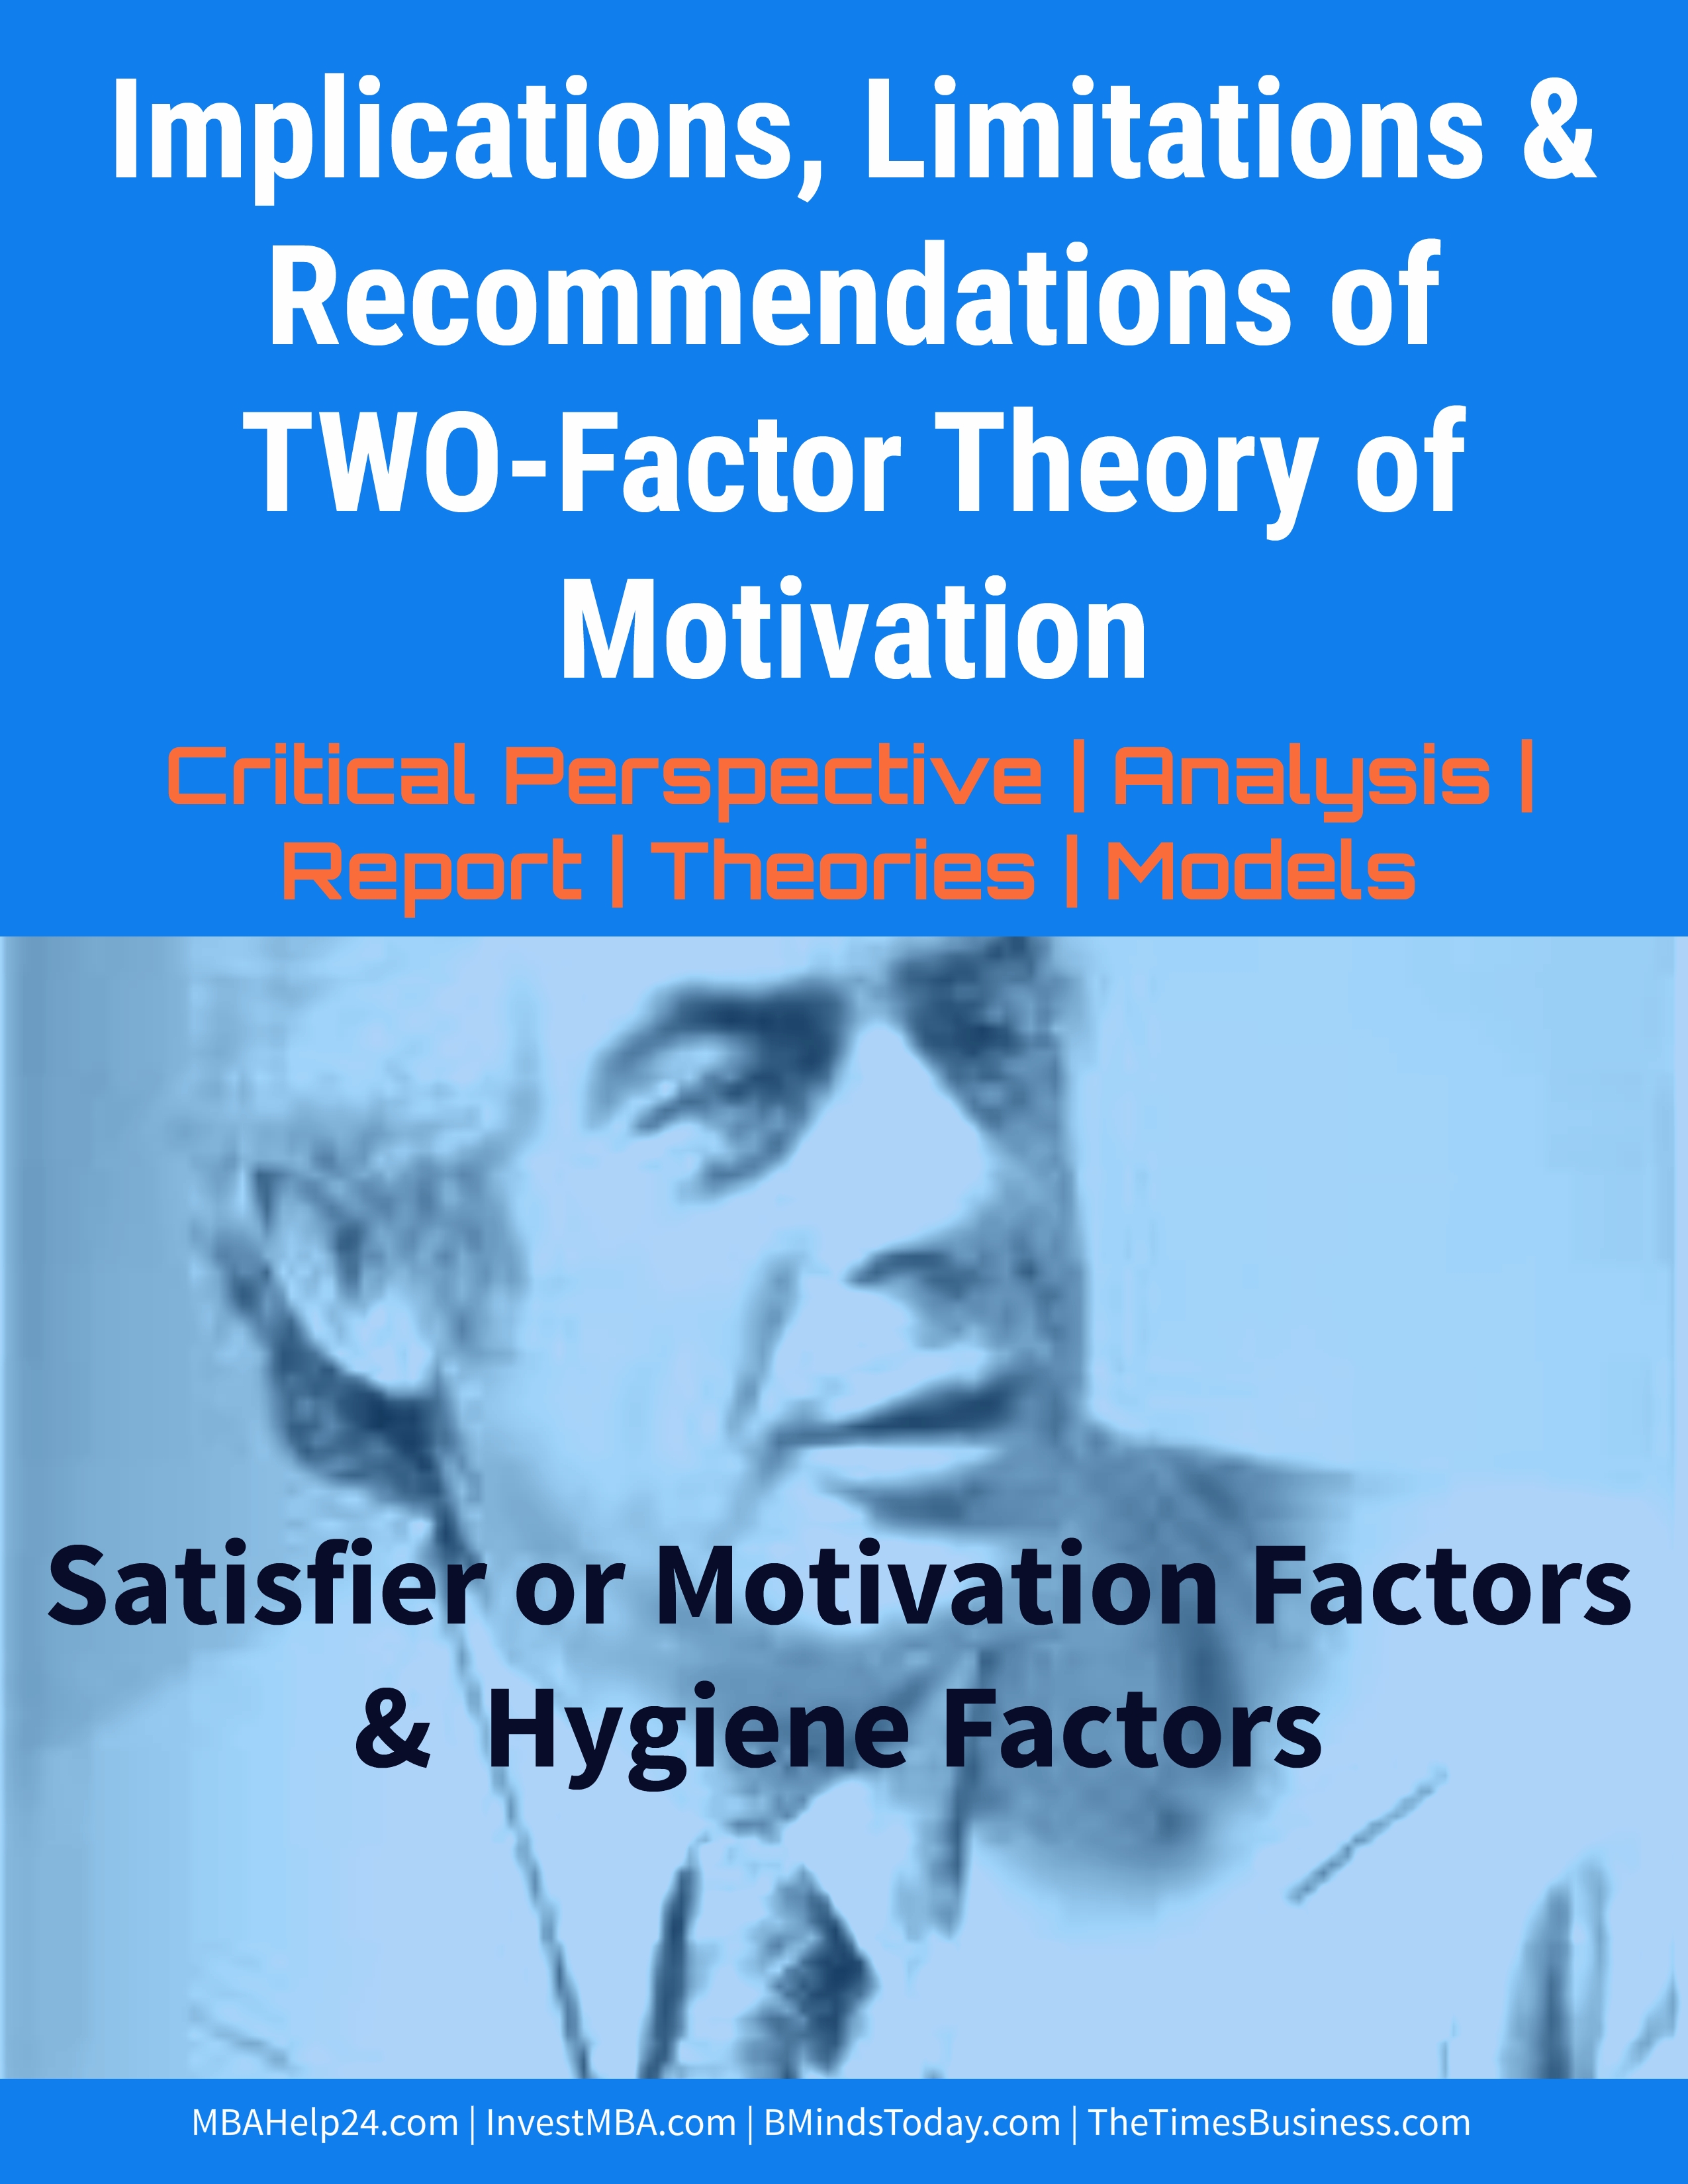 Implications, Limitations & Recommendations of TWO-Factor Theory of Motivation motivation Implications, Limitations &#038; Suggestions of TWO-Factor Theory of Motivation Two factor theory of motivation limtations